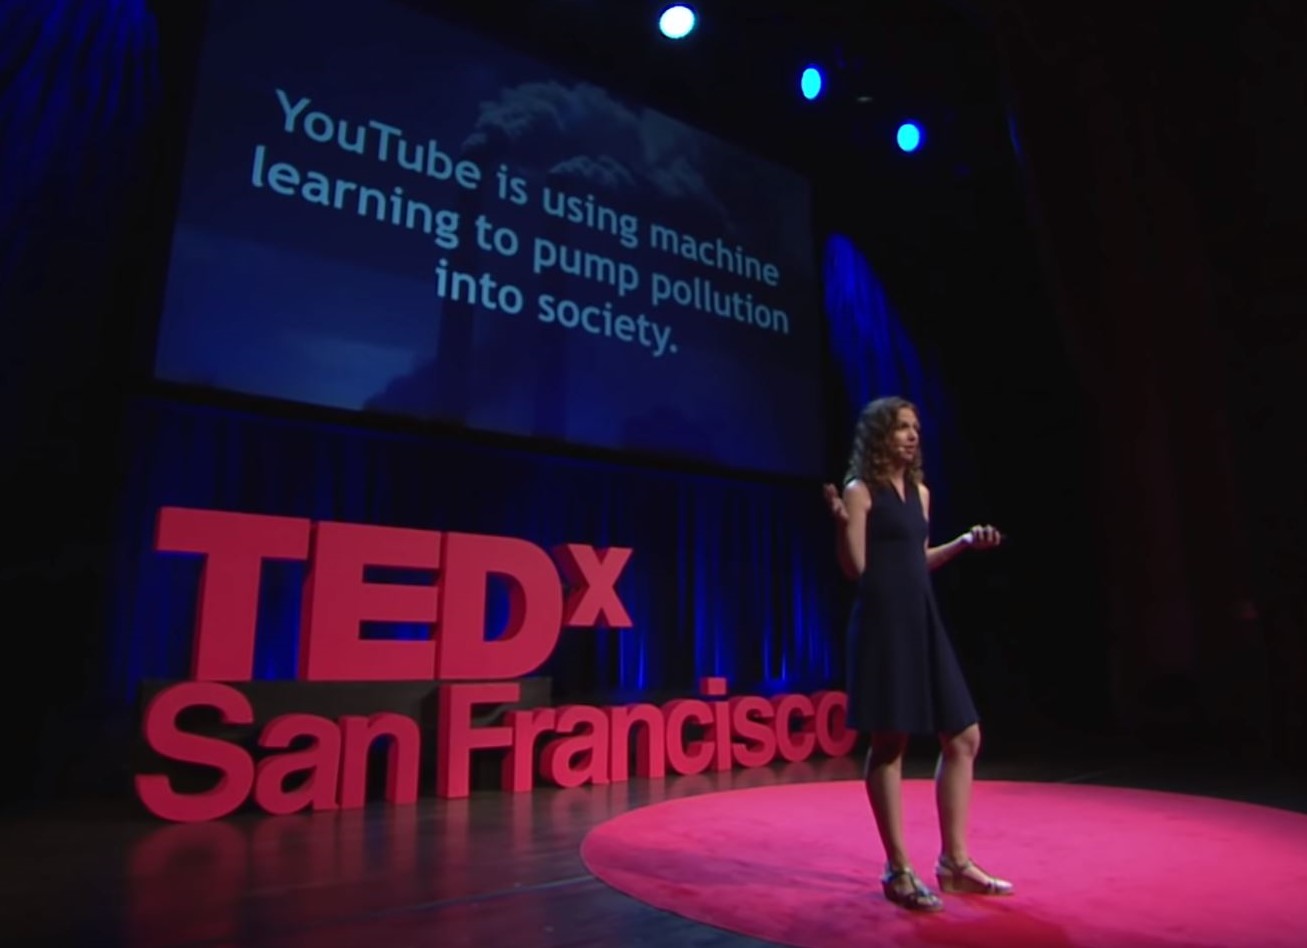 YouTube is using machine learning to pump pollution into society.  From my TEDx talk.